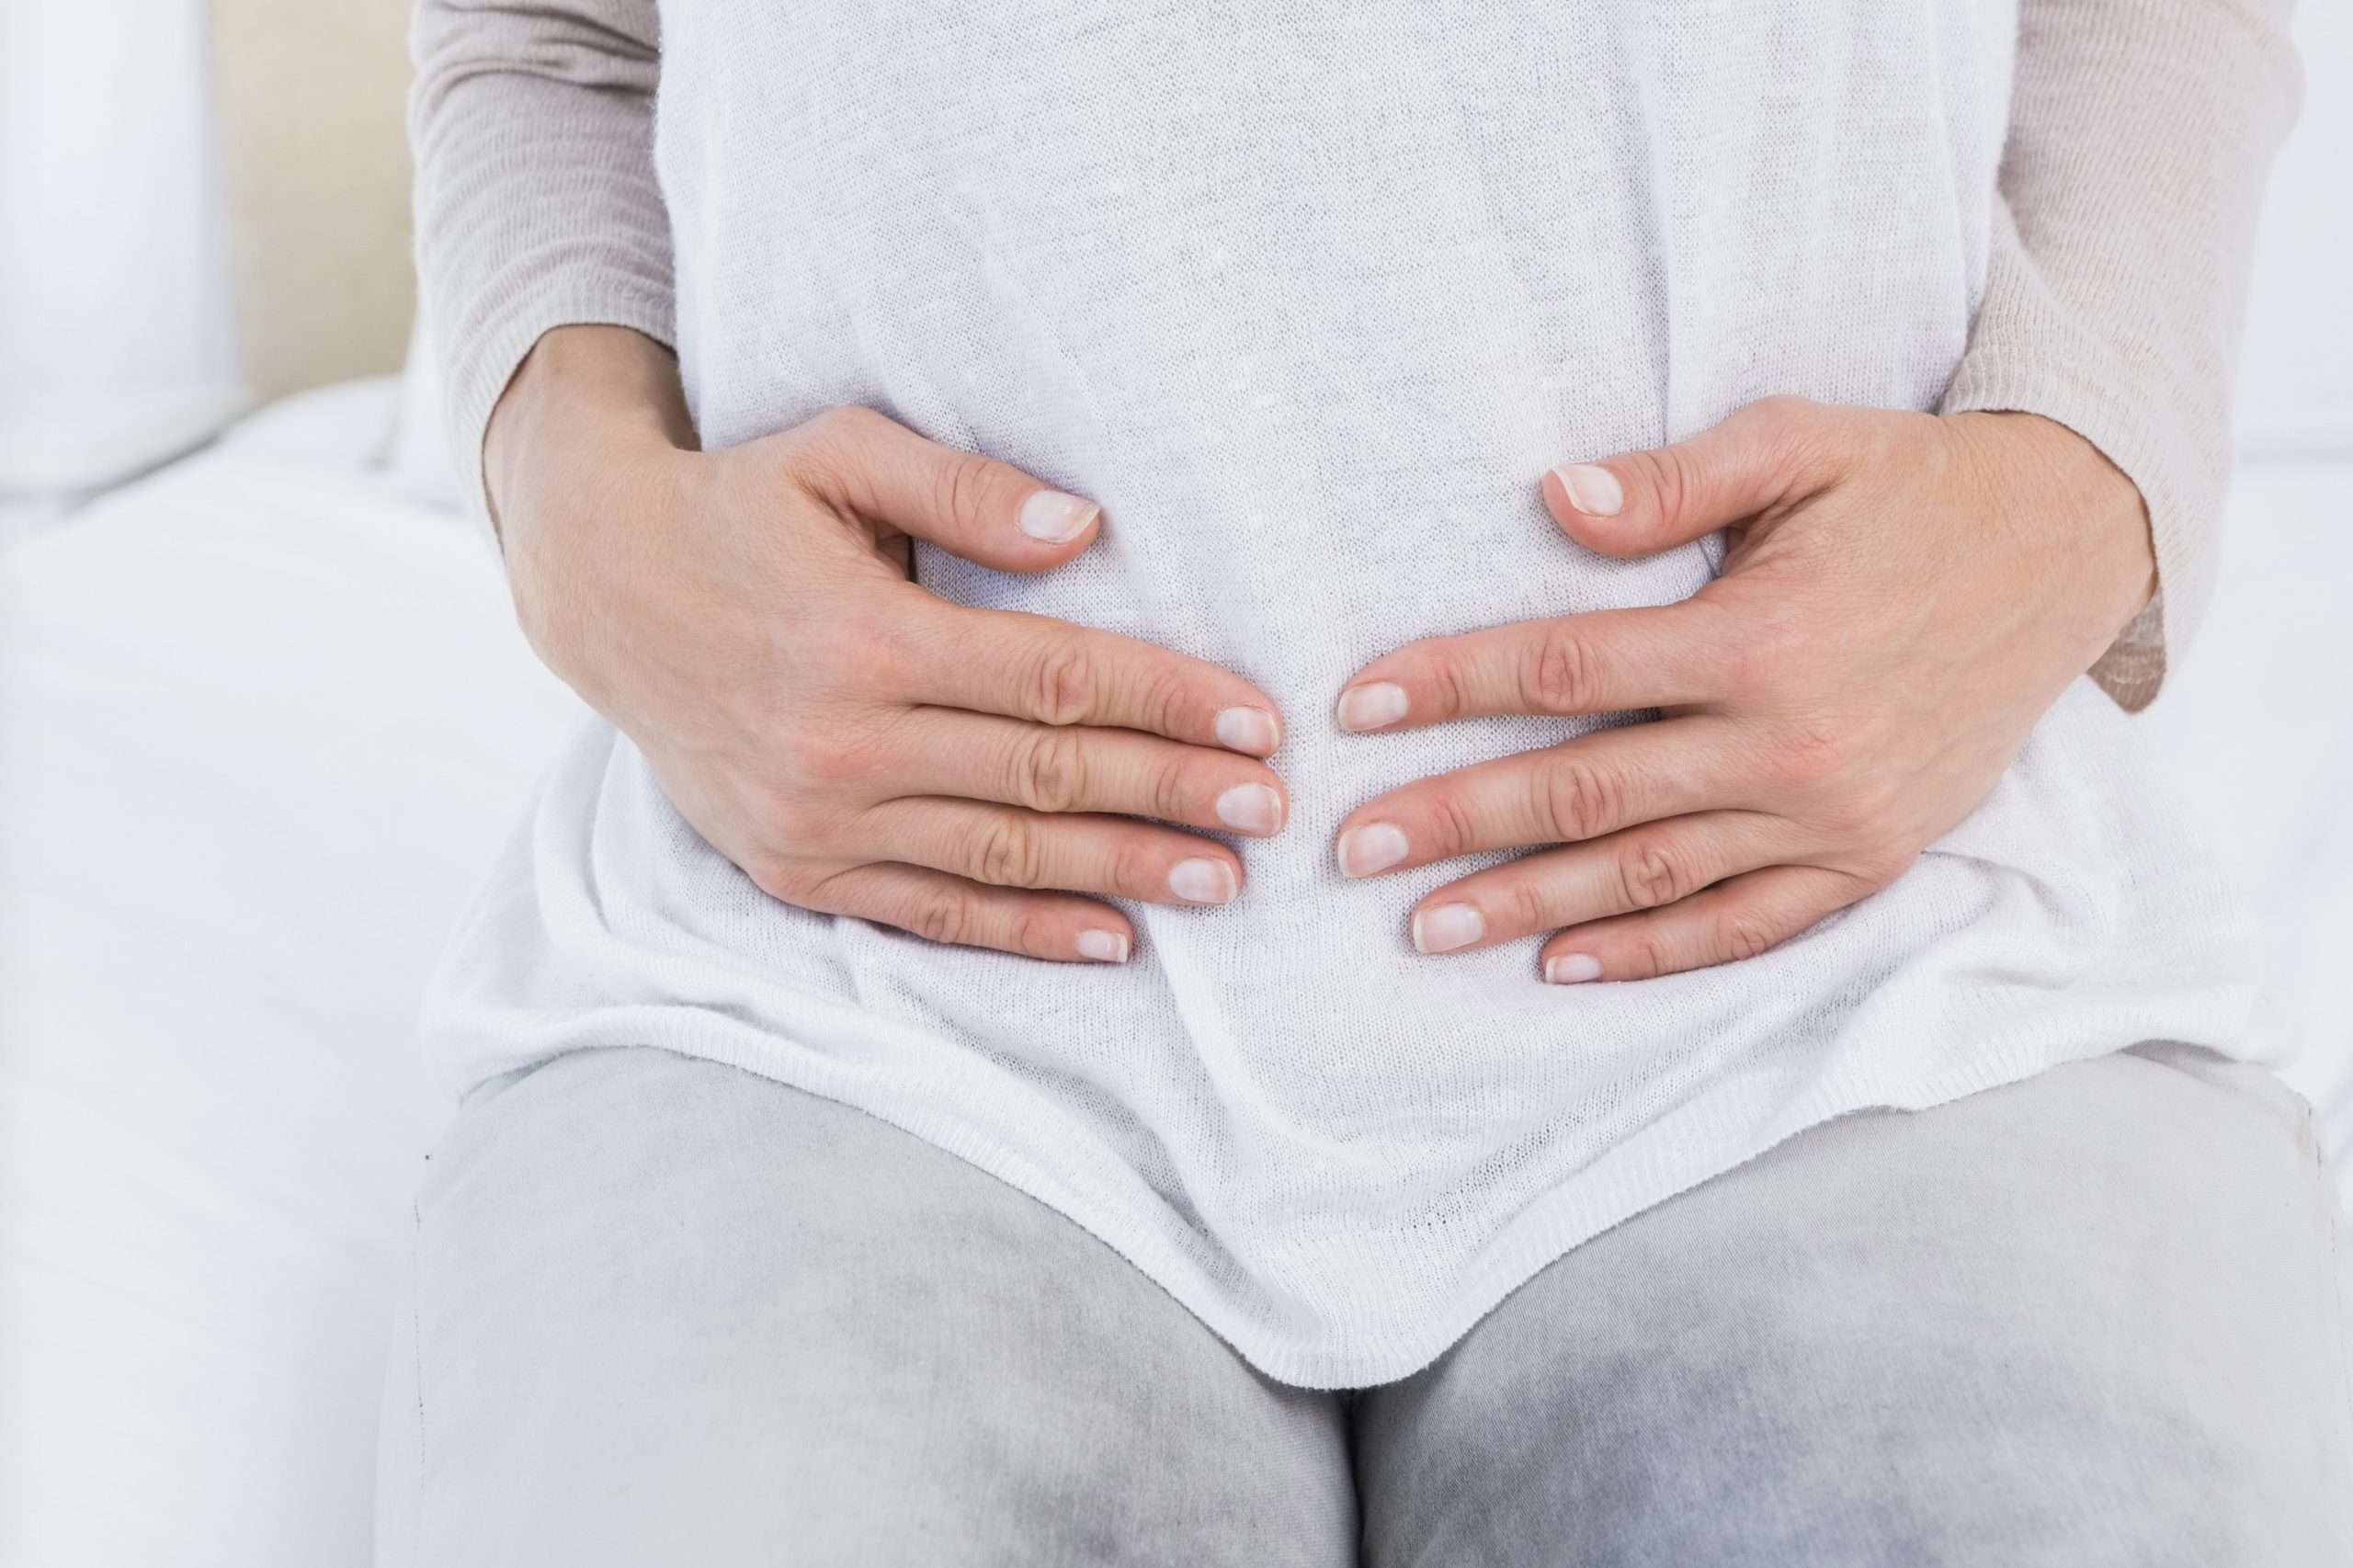 Feeling bloated? Common causes of bloating and how to beat it